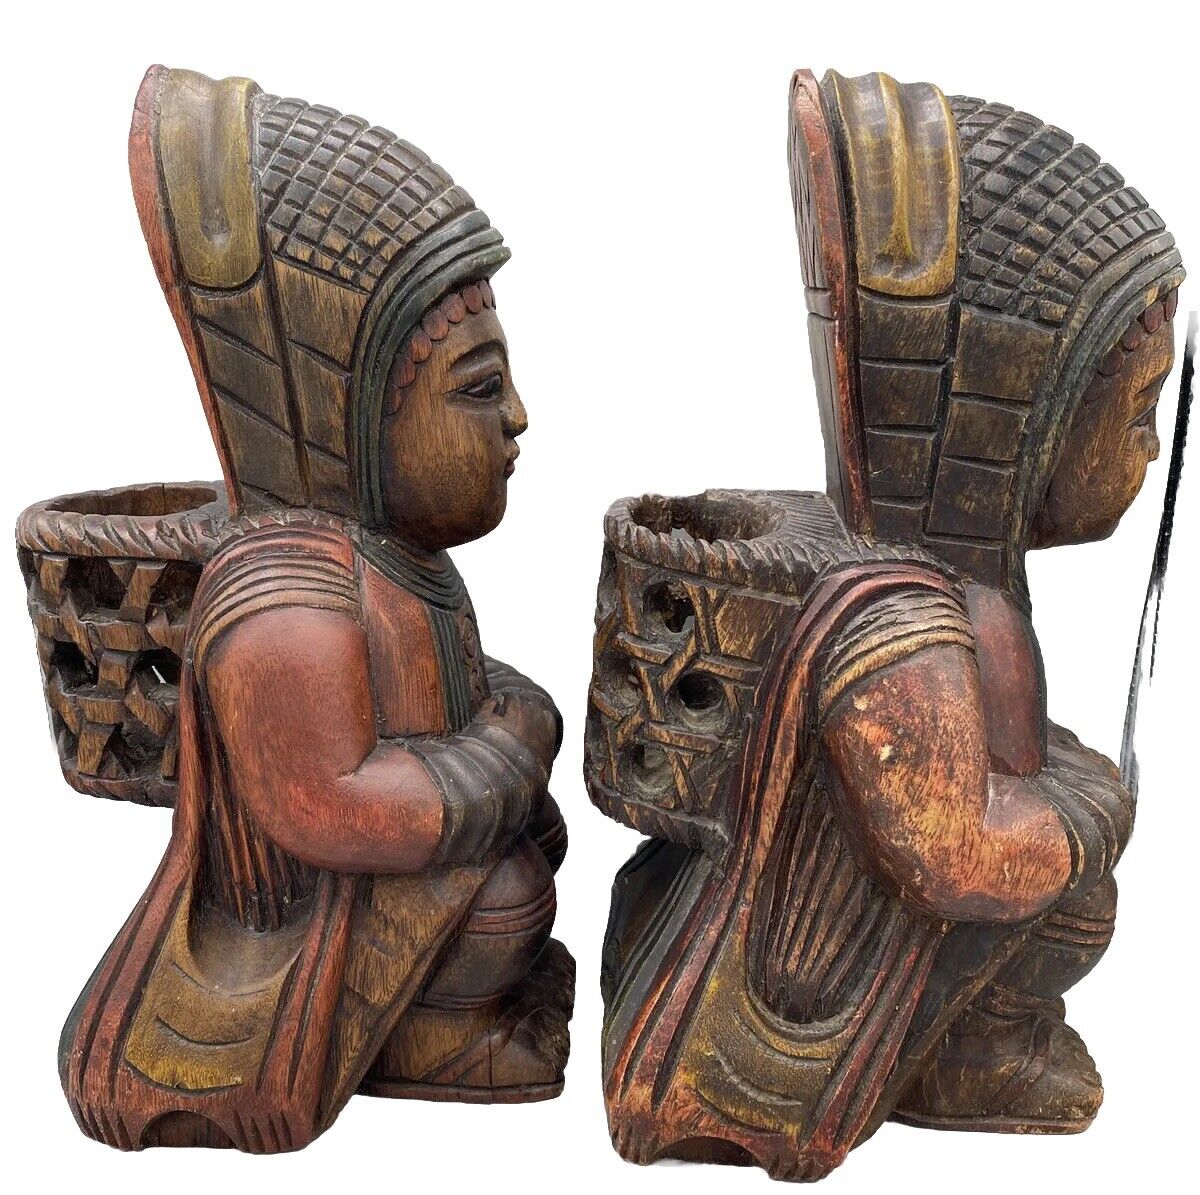 Asian Wood Figurines Statues Hand Carved Art Basket Sculpture Antique RARE Pair